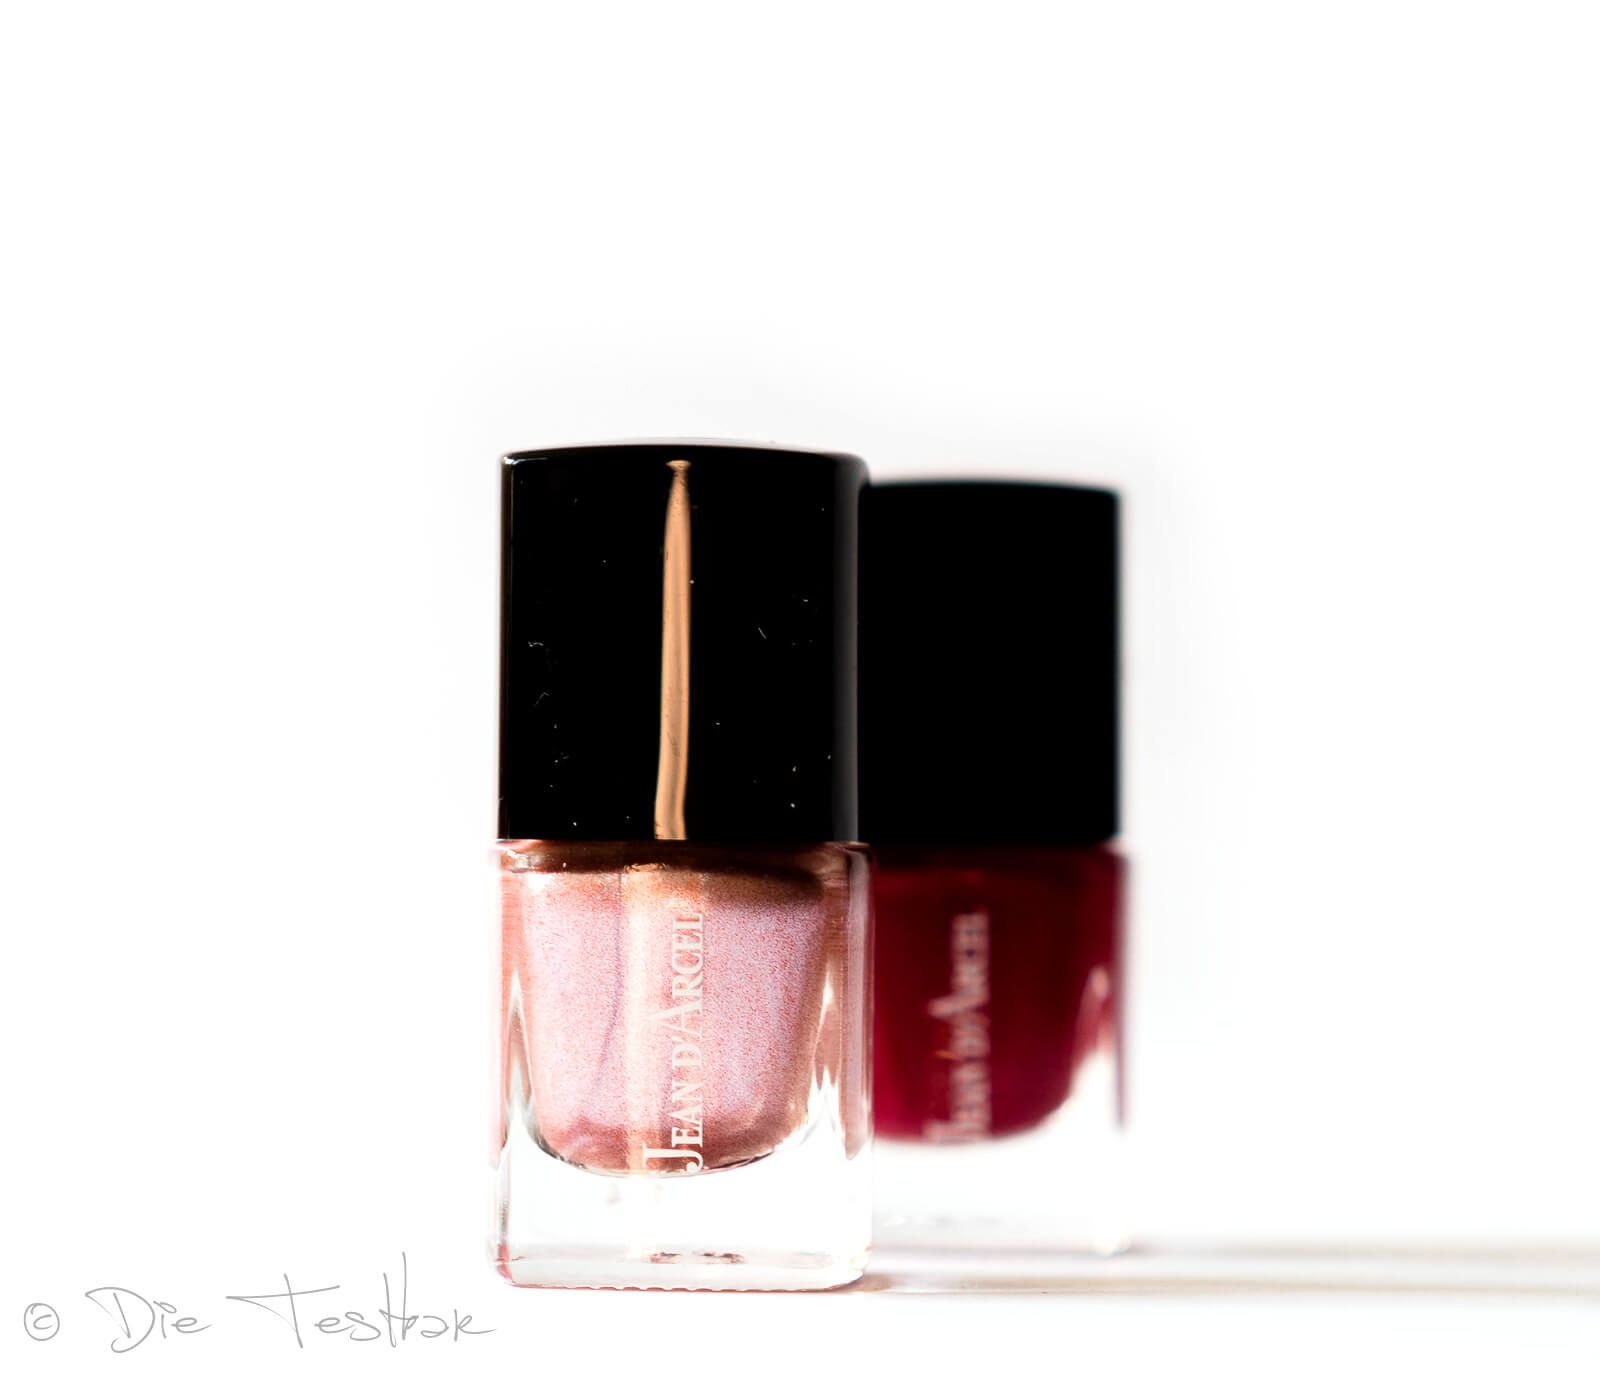 JEAN D'ARCEL nail color pearly rose No. 99